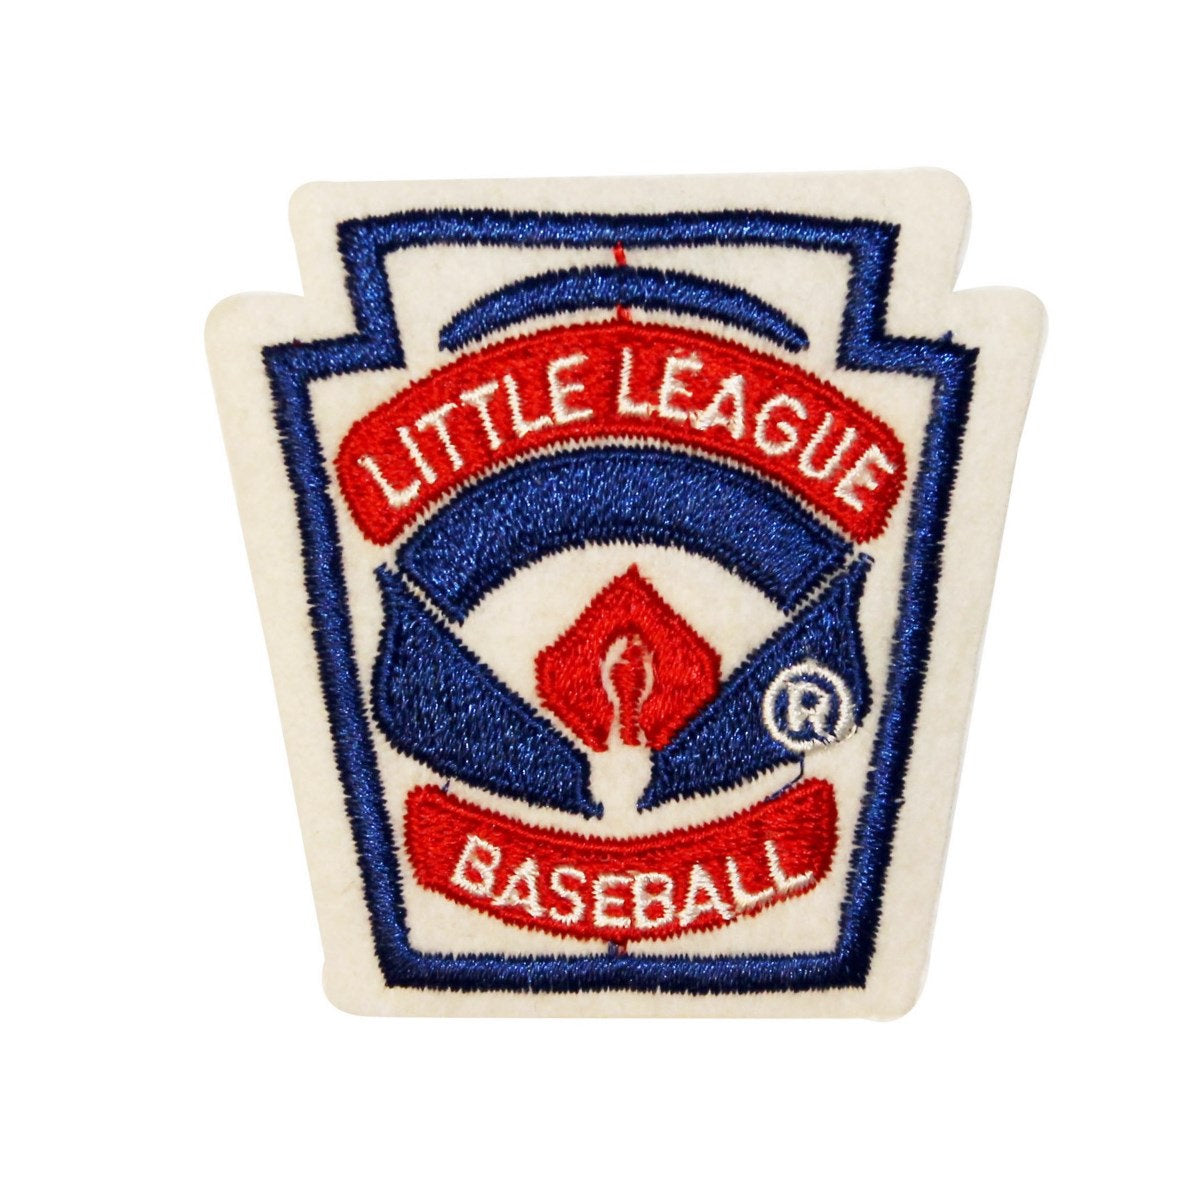 Pair flawed red white blue little league baseball patches sew or iron on  1970s 1980s vintage retro old classic rare badges OI